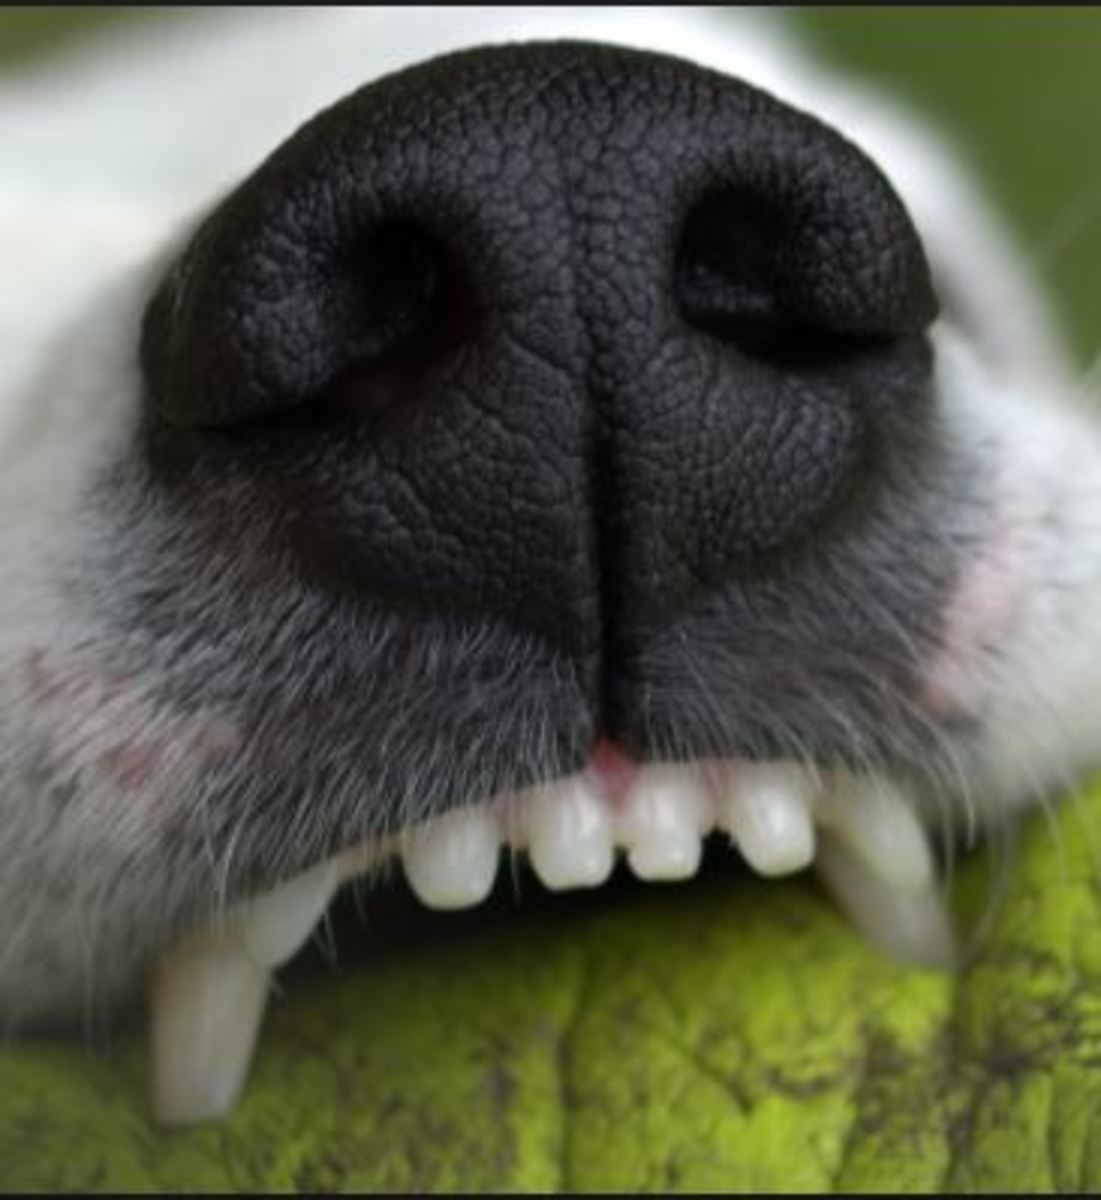 dogs teeth are worn down